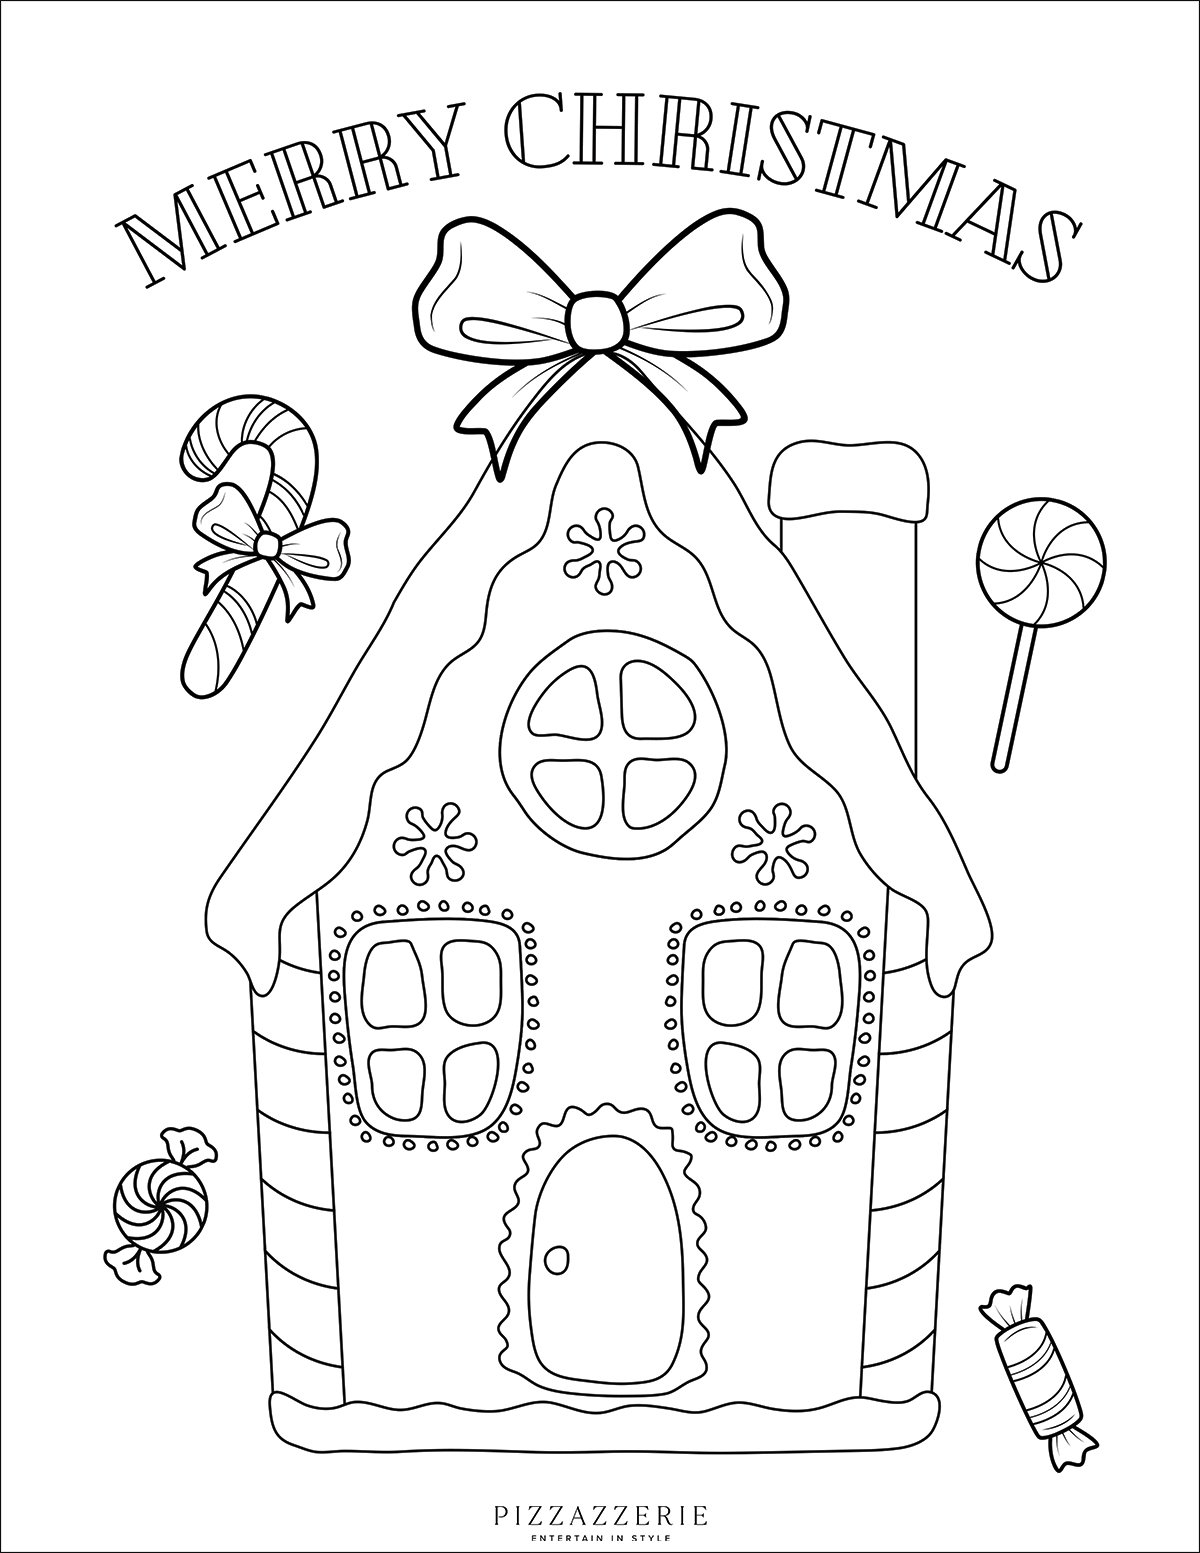 Gingerbread House Coloring Page (Free Printable PDFs) - Coloring Home